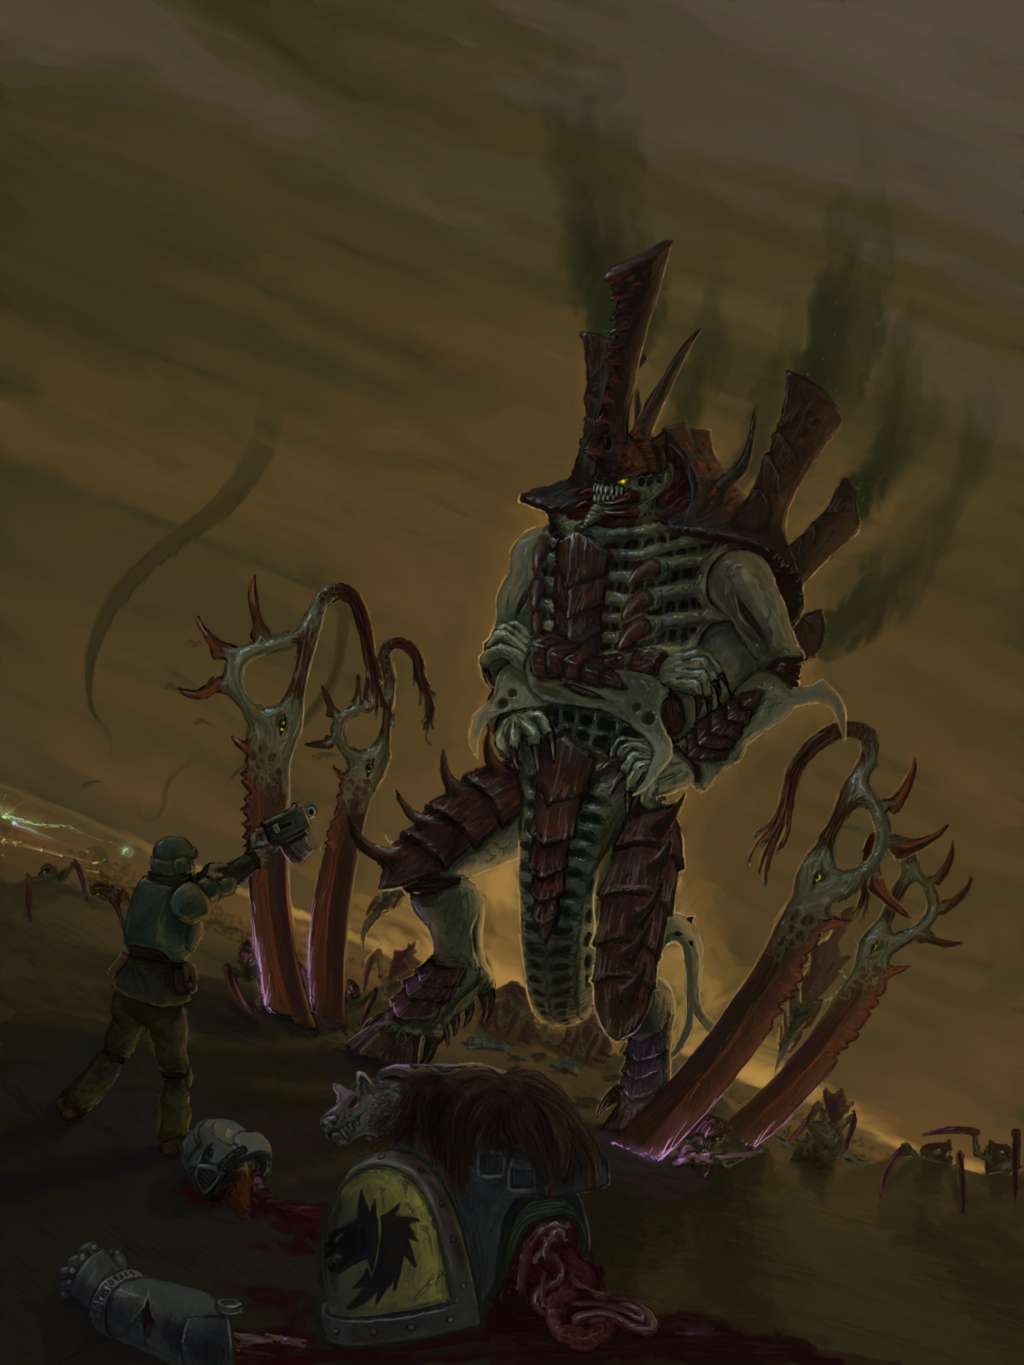 http://media.moddb.com/images/groups/1/3/2055/swarm_lord_and_pariah_by_inexstinctus-d5taebv.png